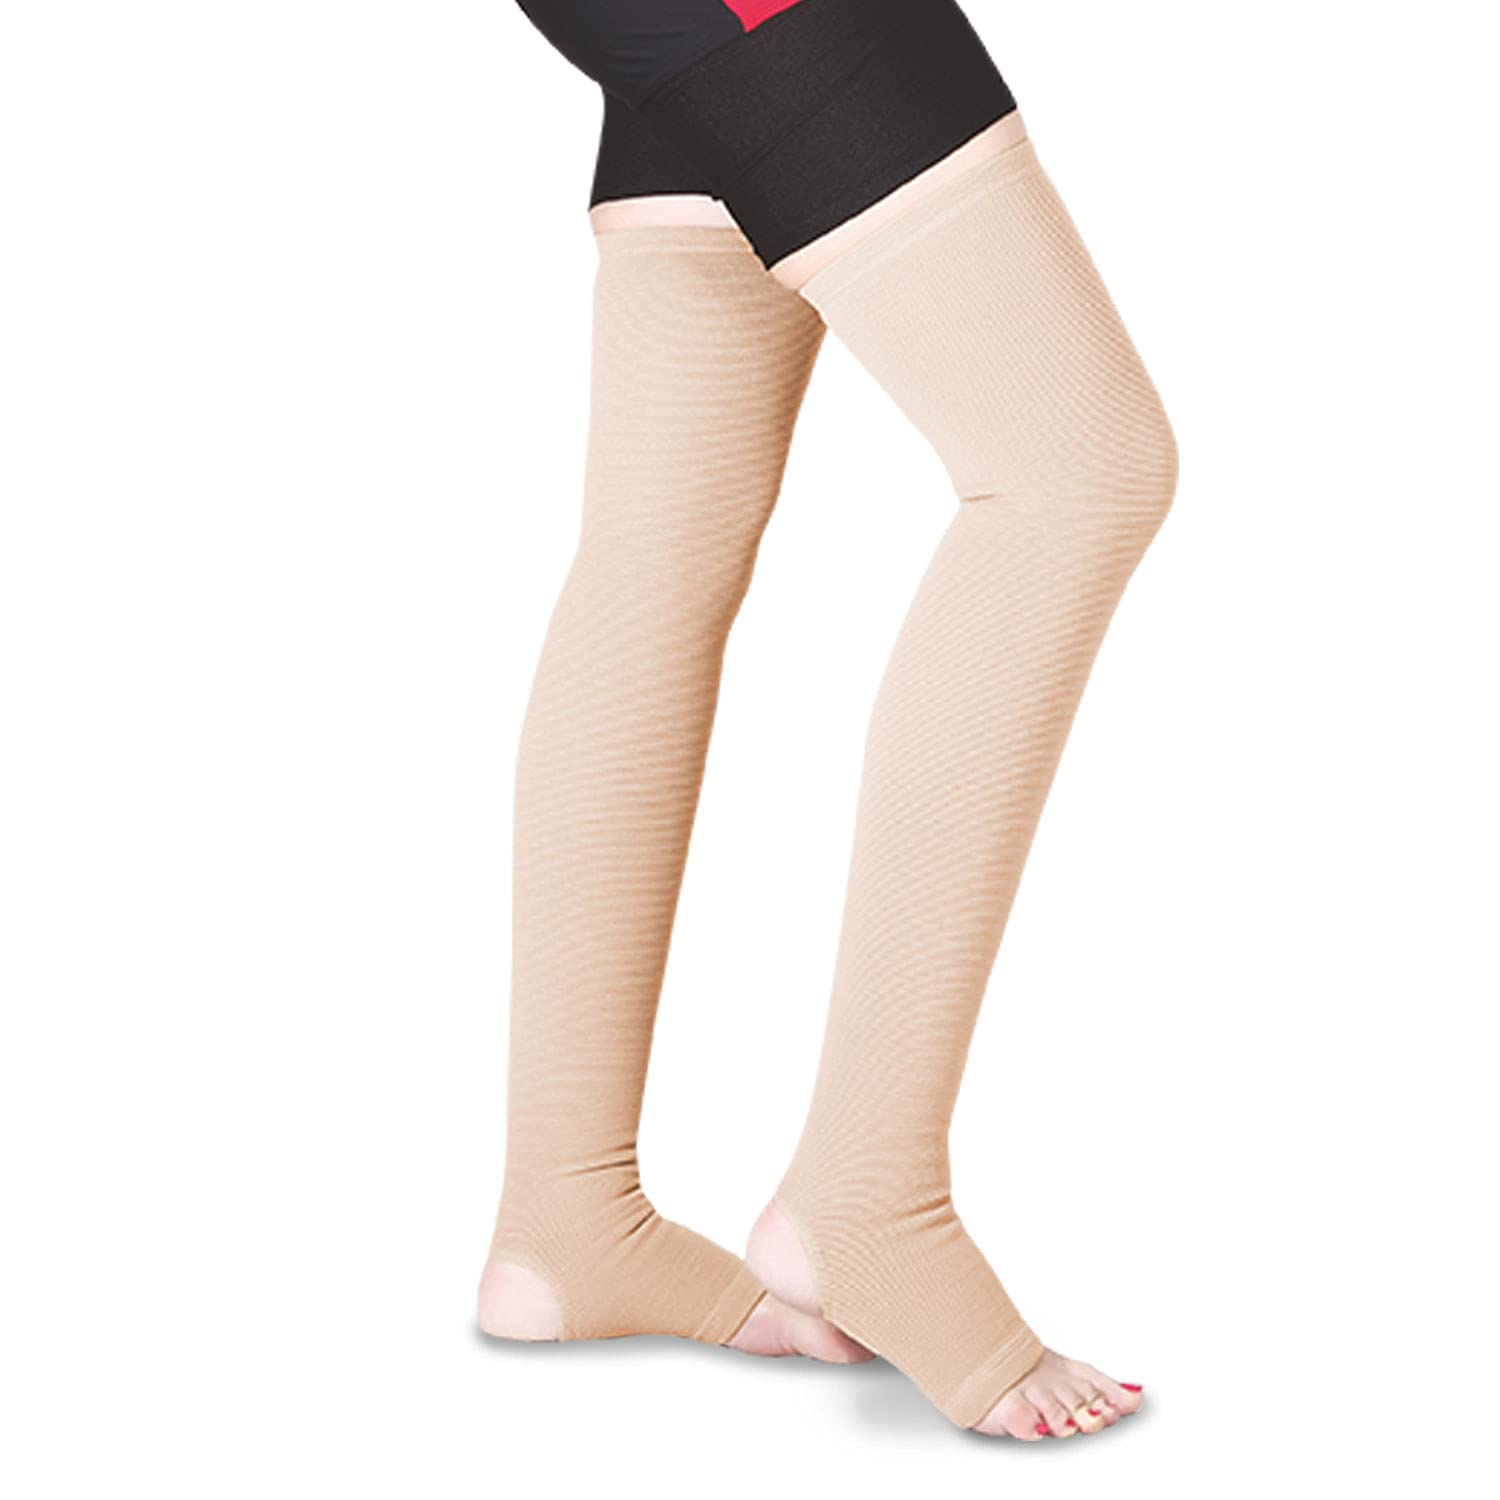 Flamingo Vericose Vein Stockings Medical Compression for Women & Men- Open Toe Compression Stockings Ergonomical, Durable, Non Slippage- Knee Length, Improve Blood Circulation